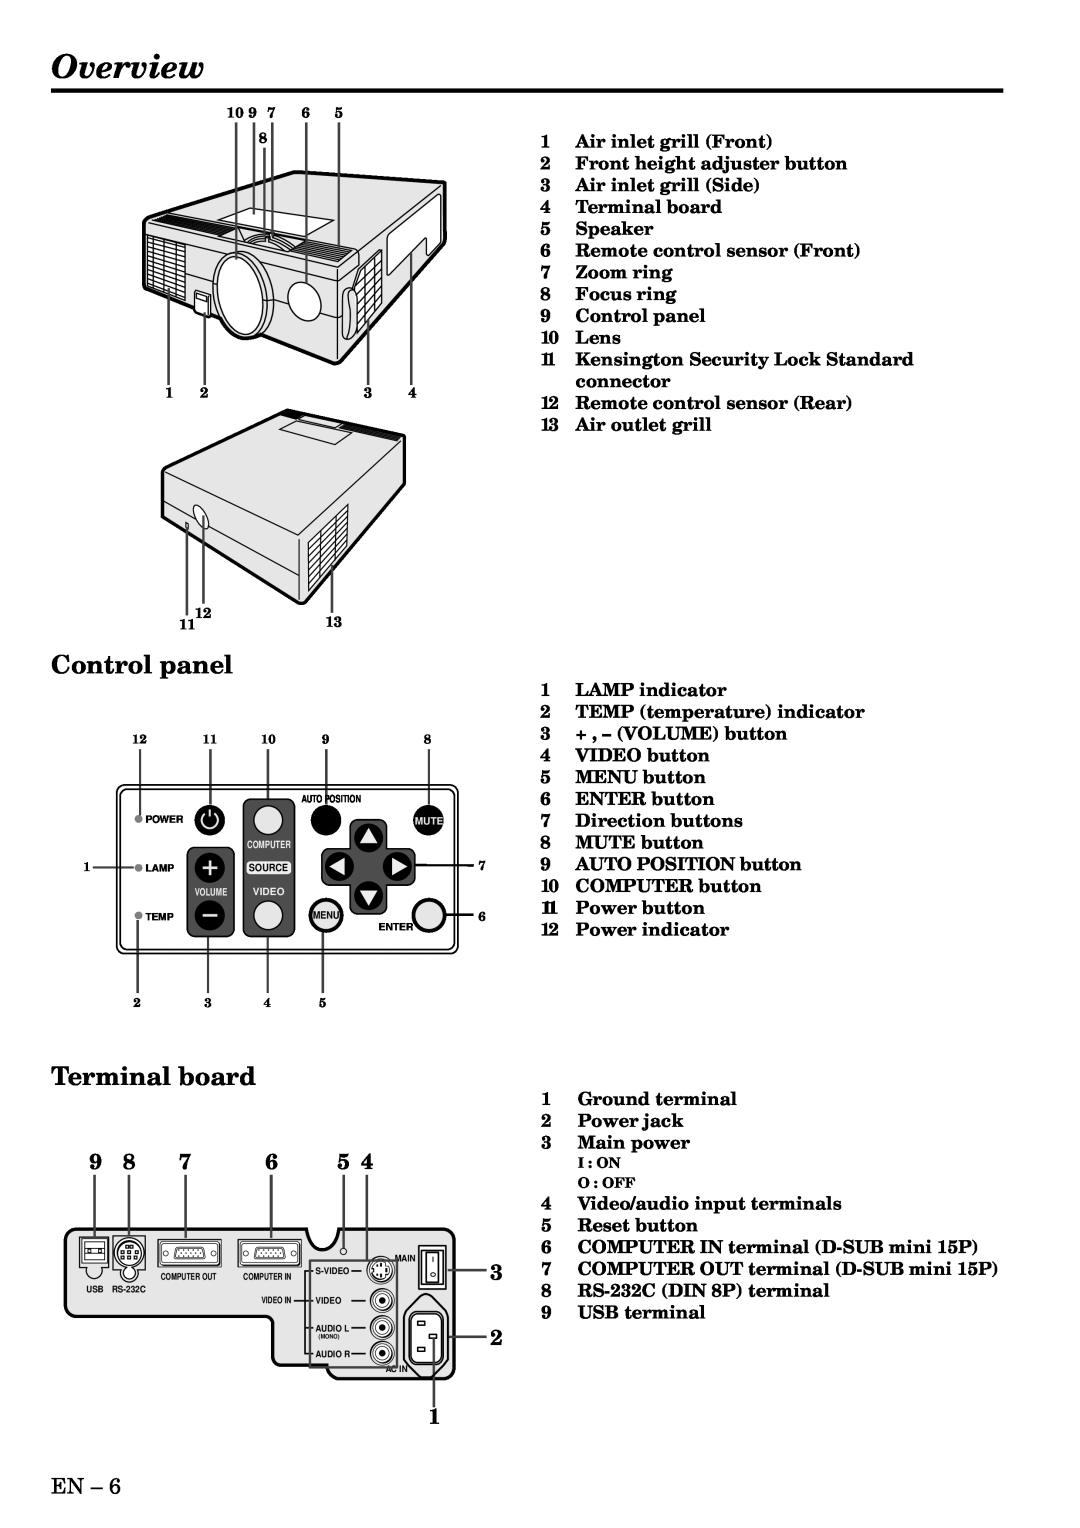 Mitsubishi Electronics X80 Overview, Control panel, Terminal board, Air inlet grill Front, Front height adjuster button 